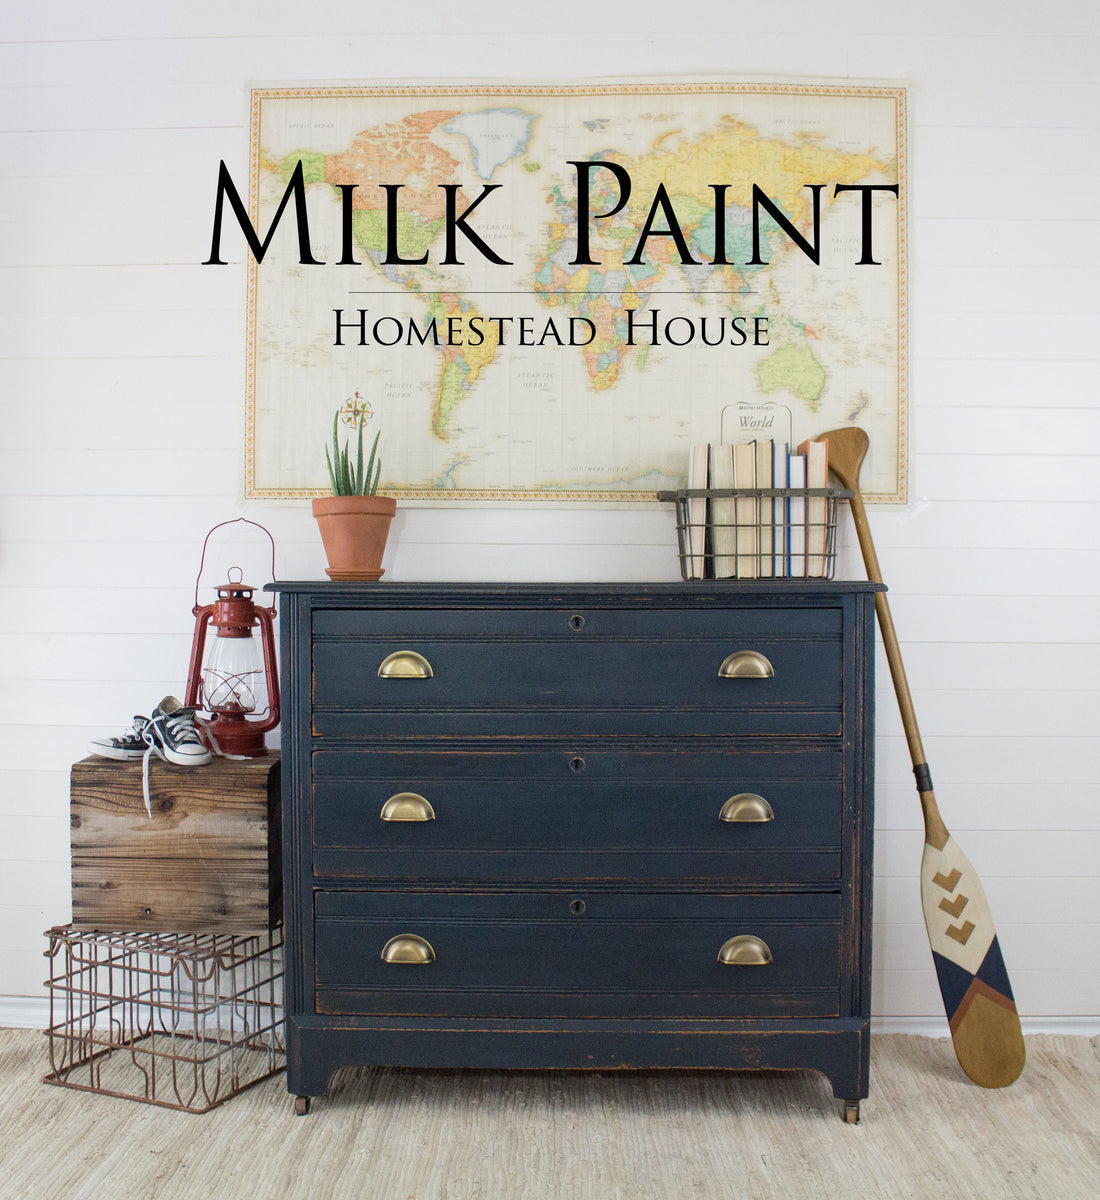 How to wax Milk Paint – Milk Paint by Homestead House